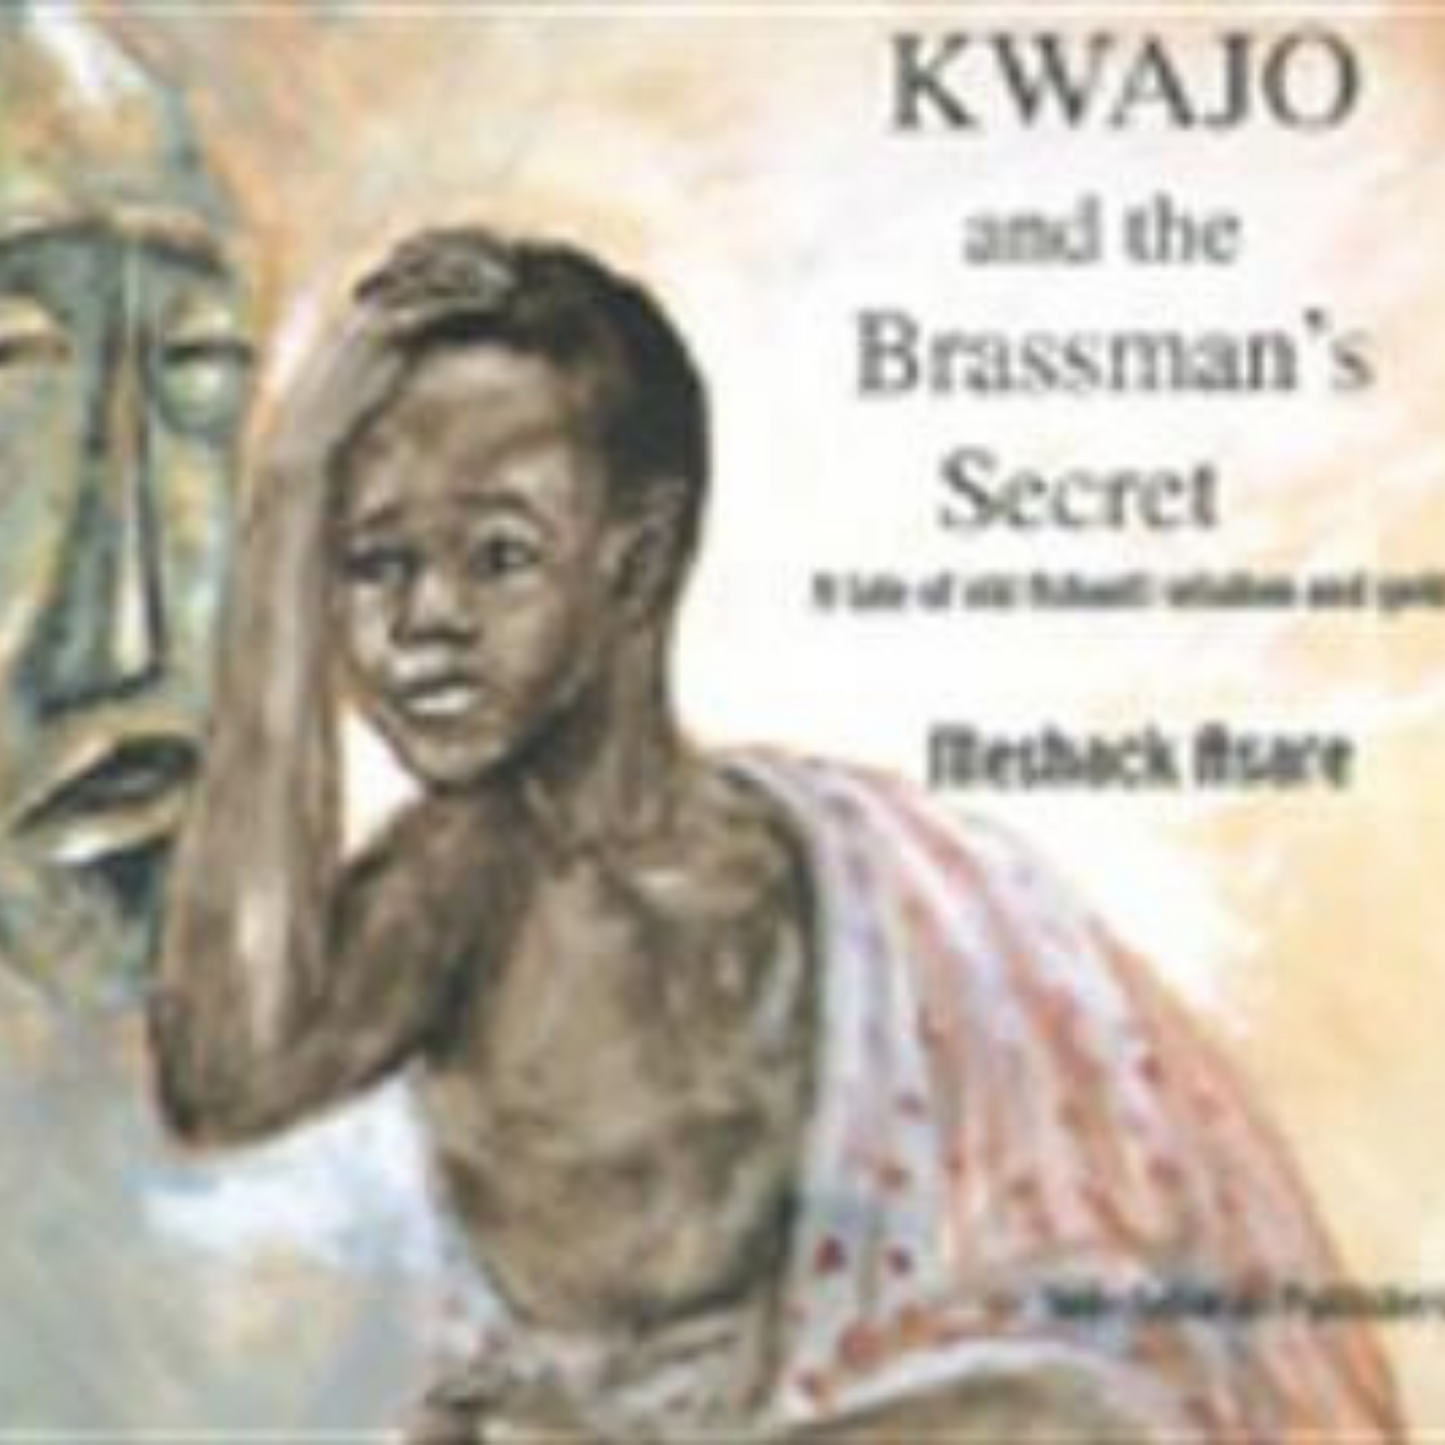 Kwajo and the Brassman's Secrets: A Tale of old Ashanti Wisdom and Gold